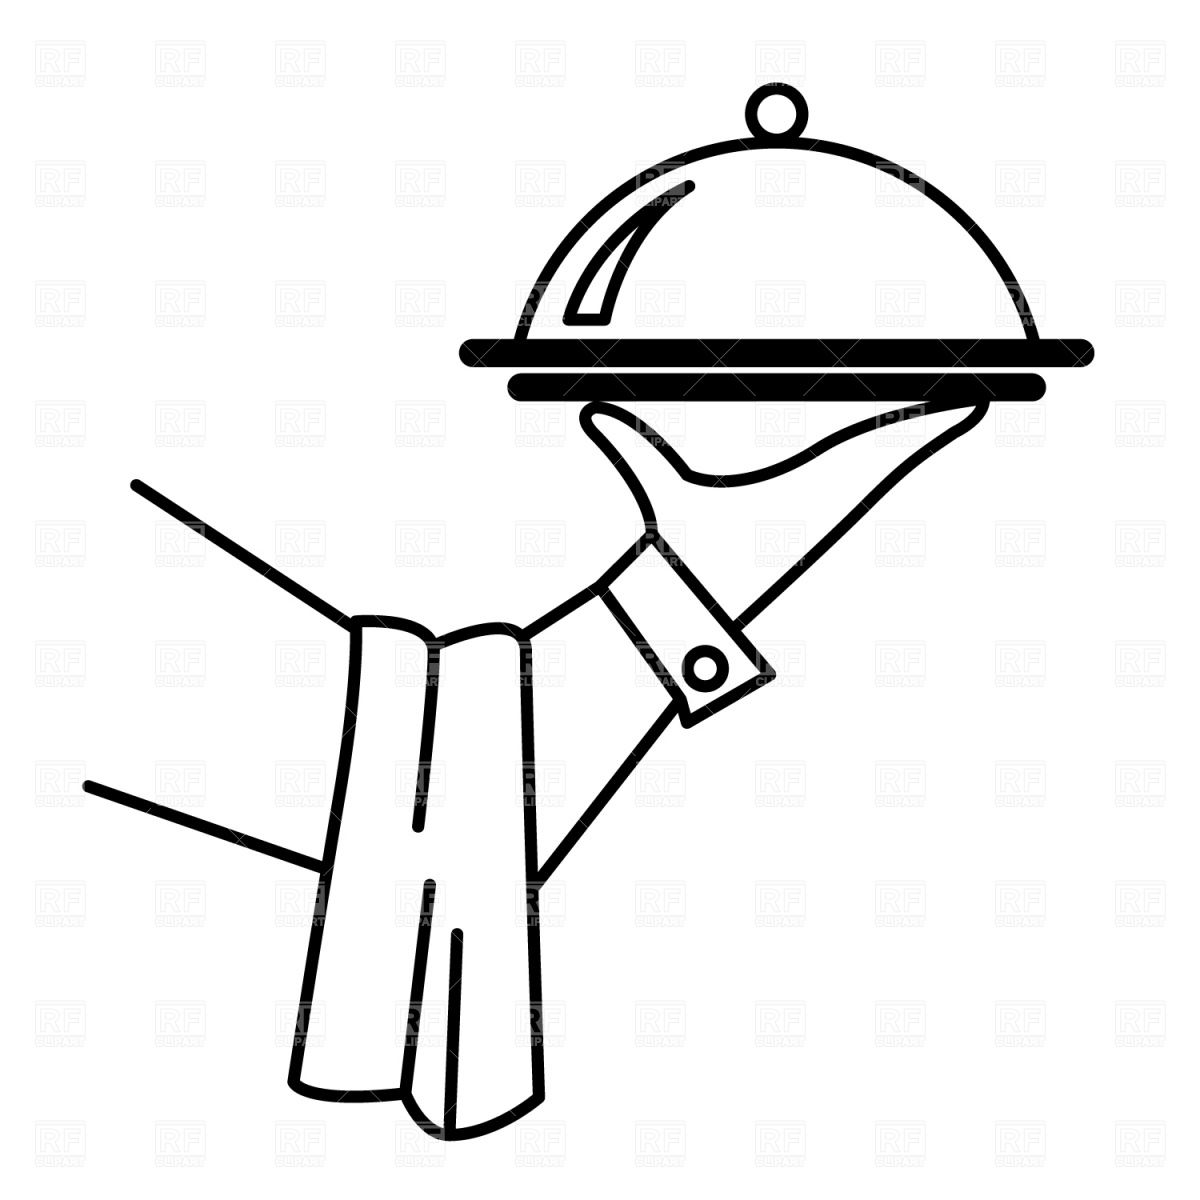 Waiter S Hand With Tray Download Royalty Free Vector Clipart  Eps